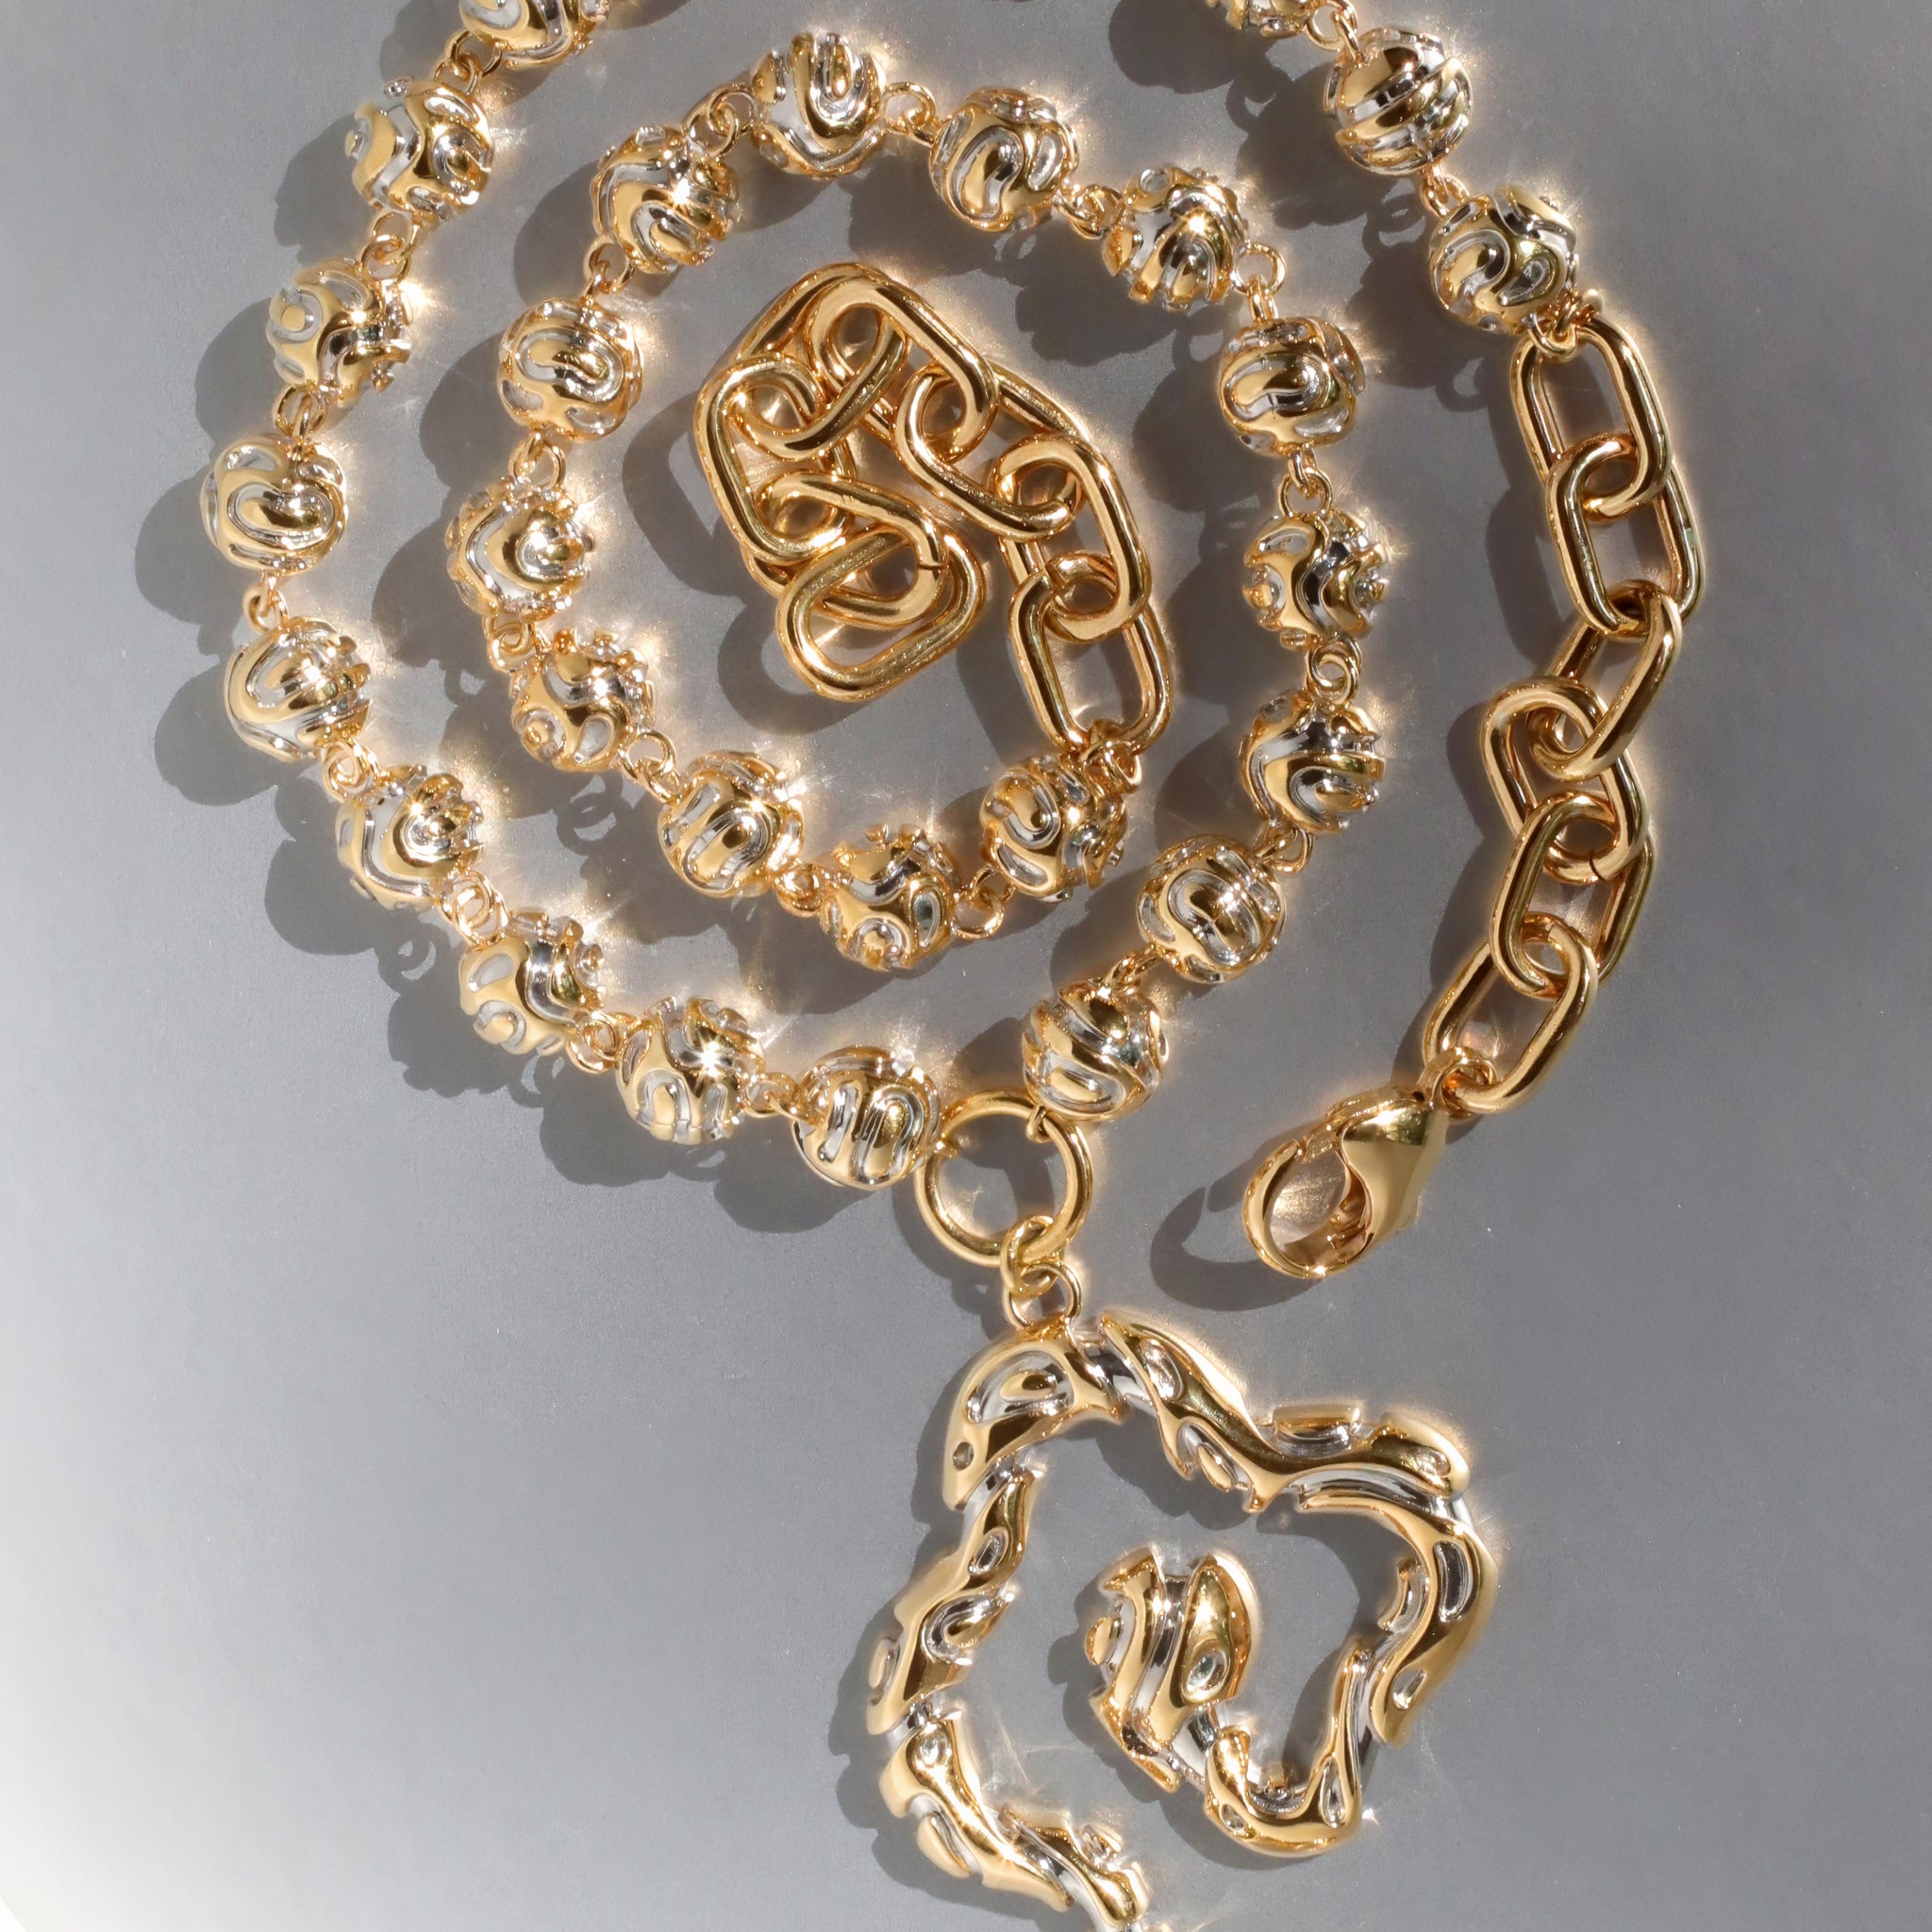 TENDRIL PENDANT BALL CHAIN NECKLACE